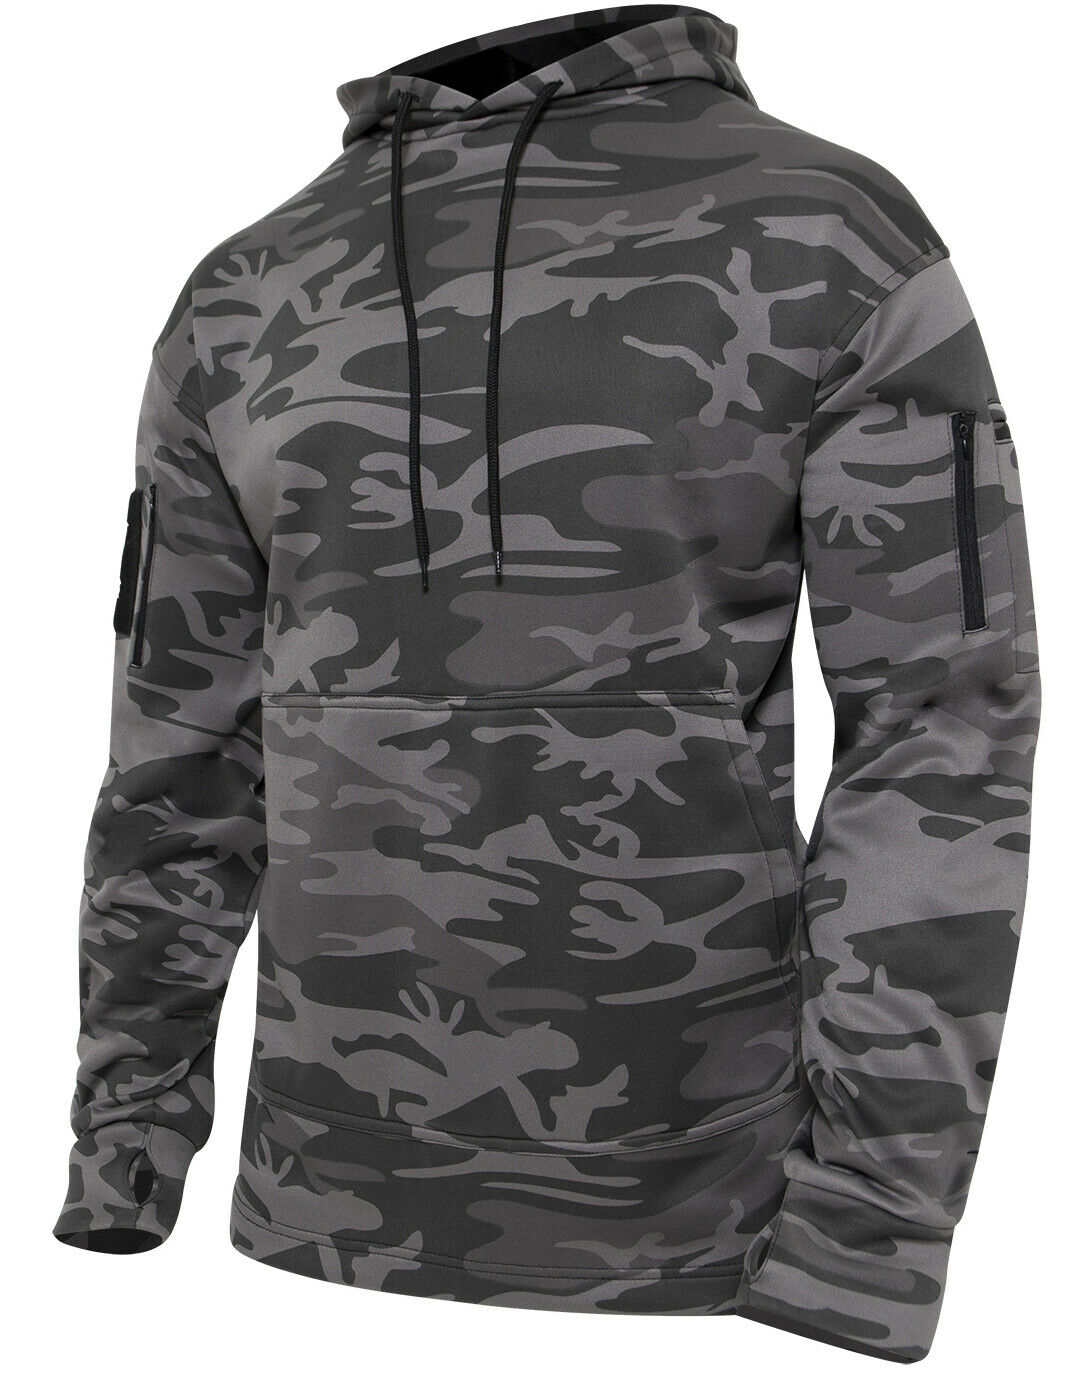 Rothco Concealed Carry Hoodie - Black Camo